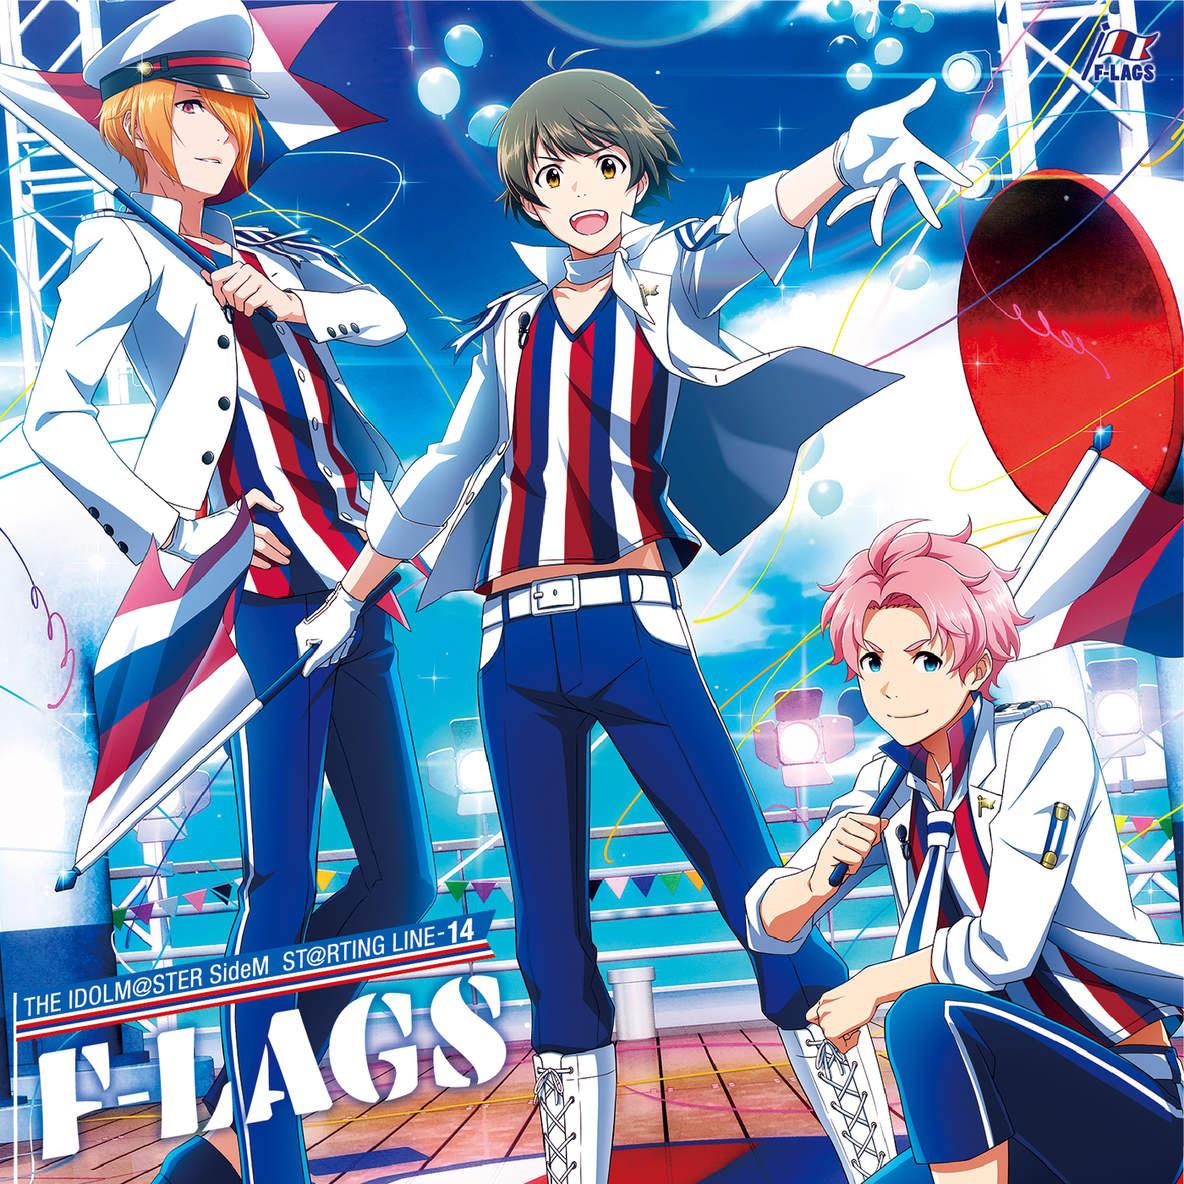 THE IDOLM@STER SideM ST@RTING LINE-14 F-LAGS专辑